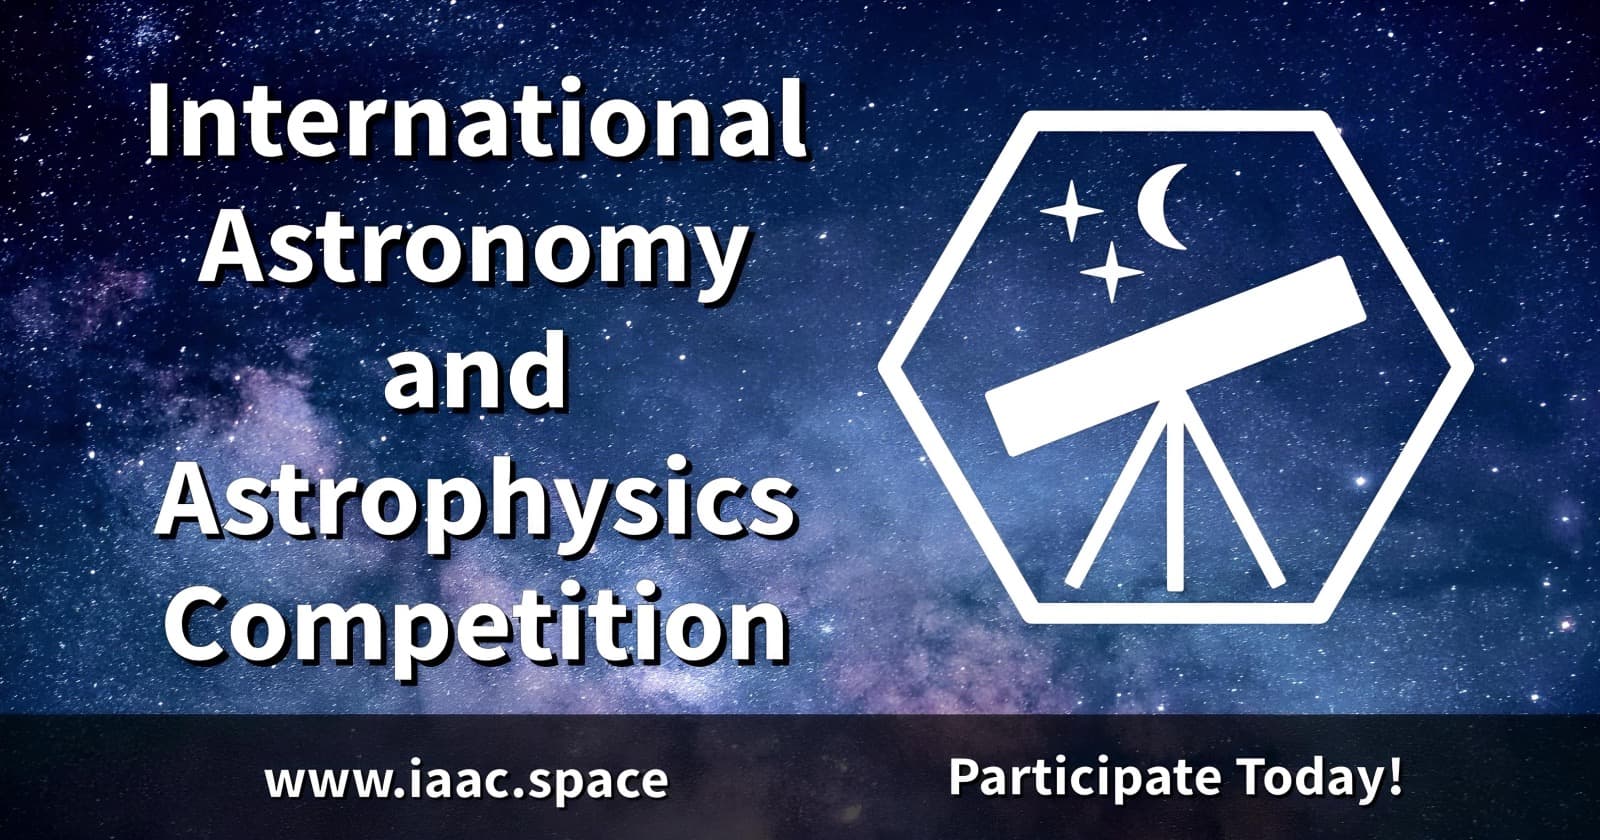 International Astronomy and Astrophysics Competition (IAAC)